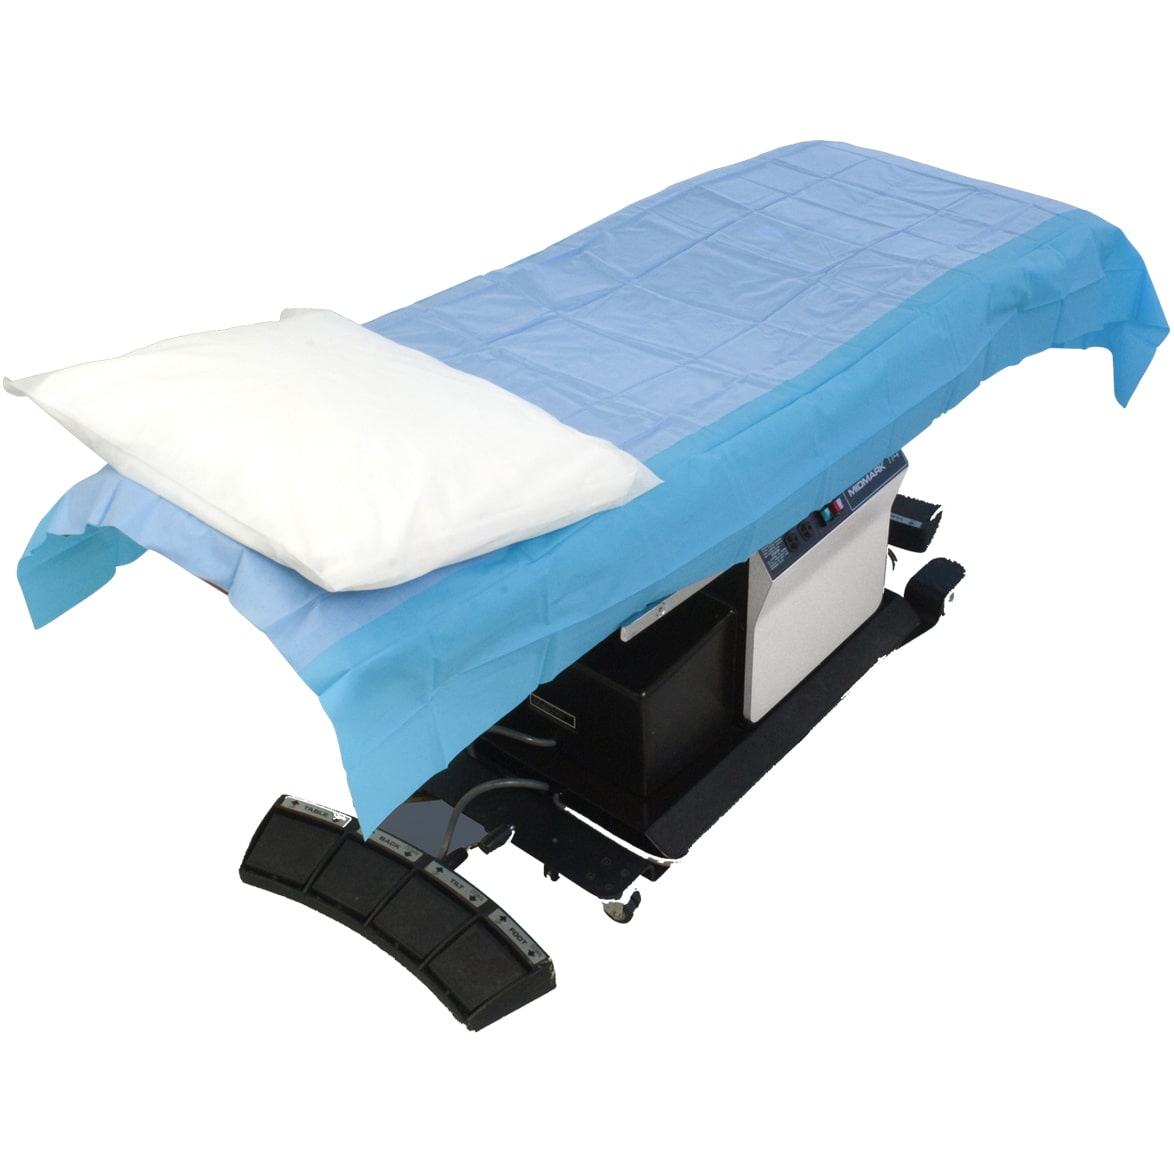 HK Surgical Absorbent OR Table Sheet